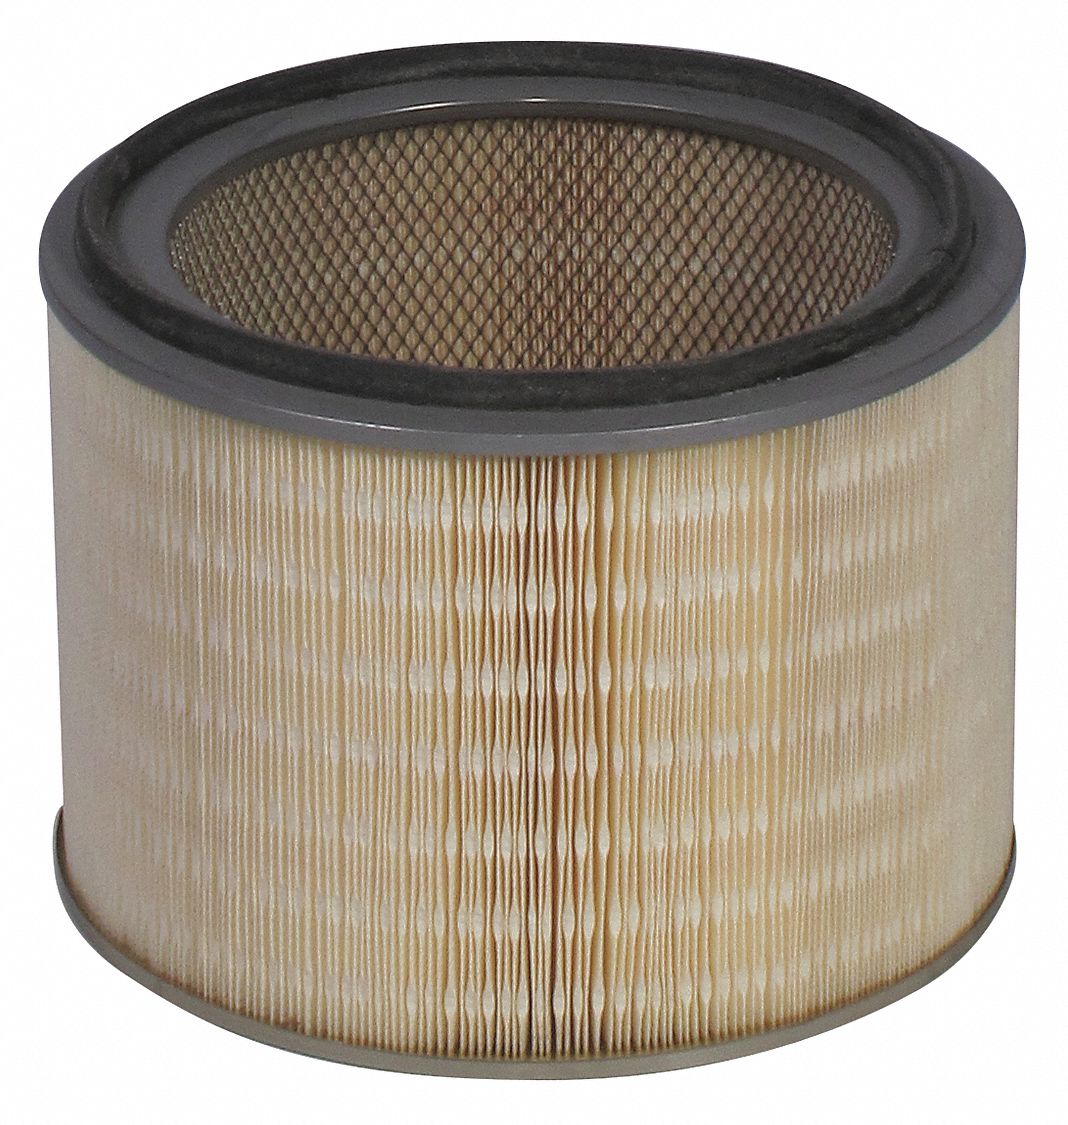 Cartridge Filter; For Use With Mfr. No. S211